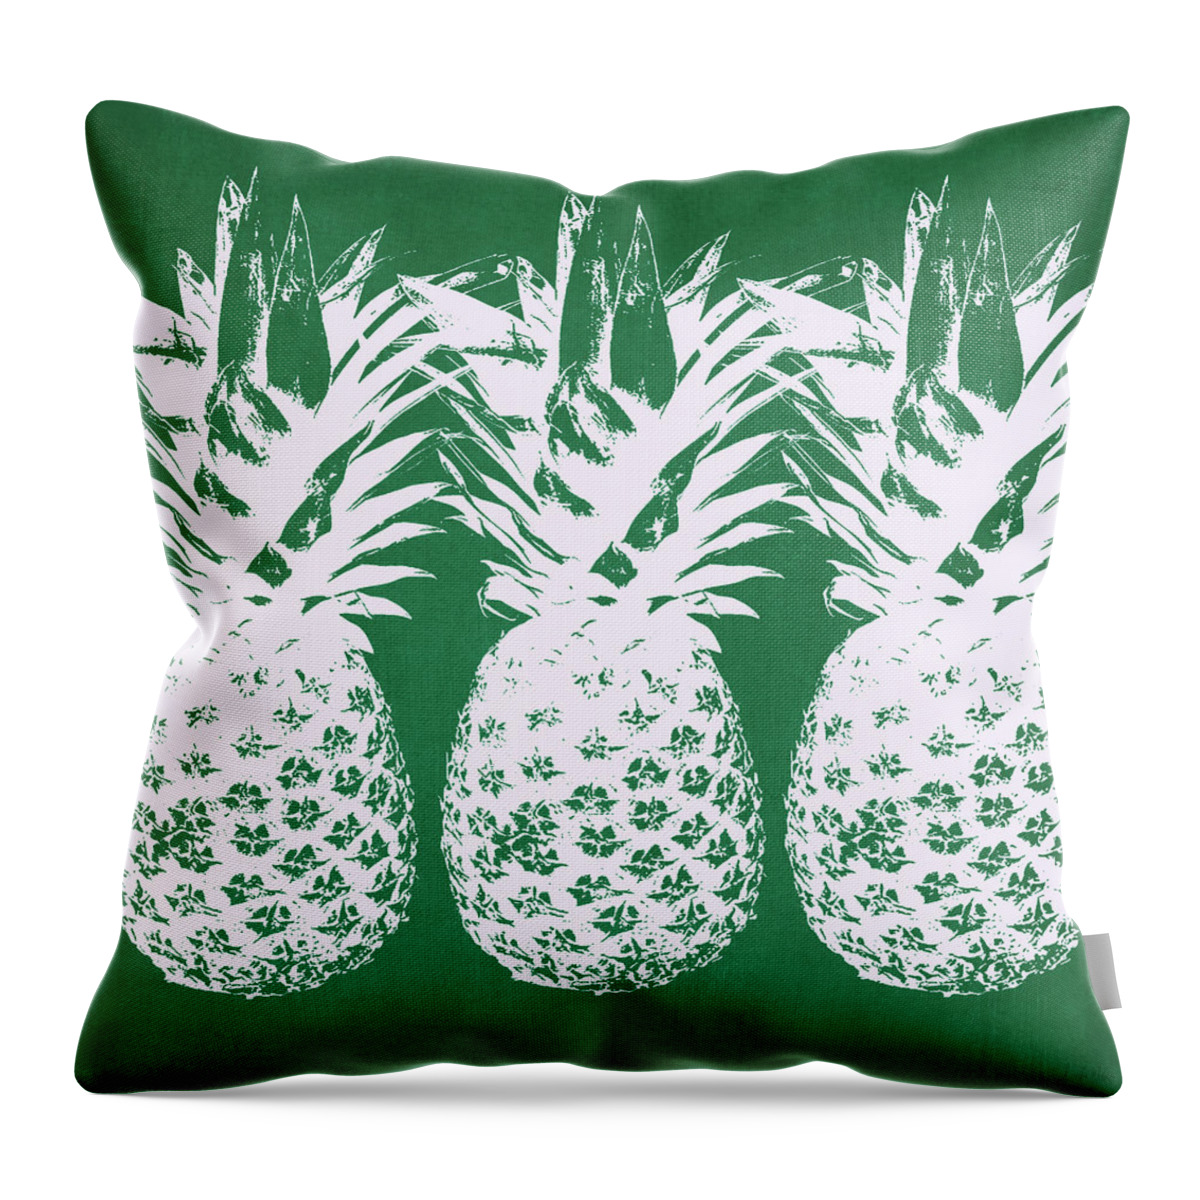 Pineapple Throw Pillow featuring the mixed media Emerald Pineapples- Art by Linda Woods by Linda Woods